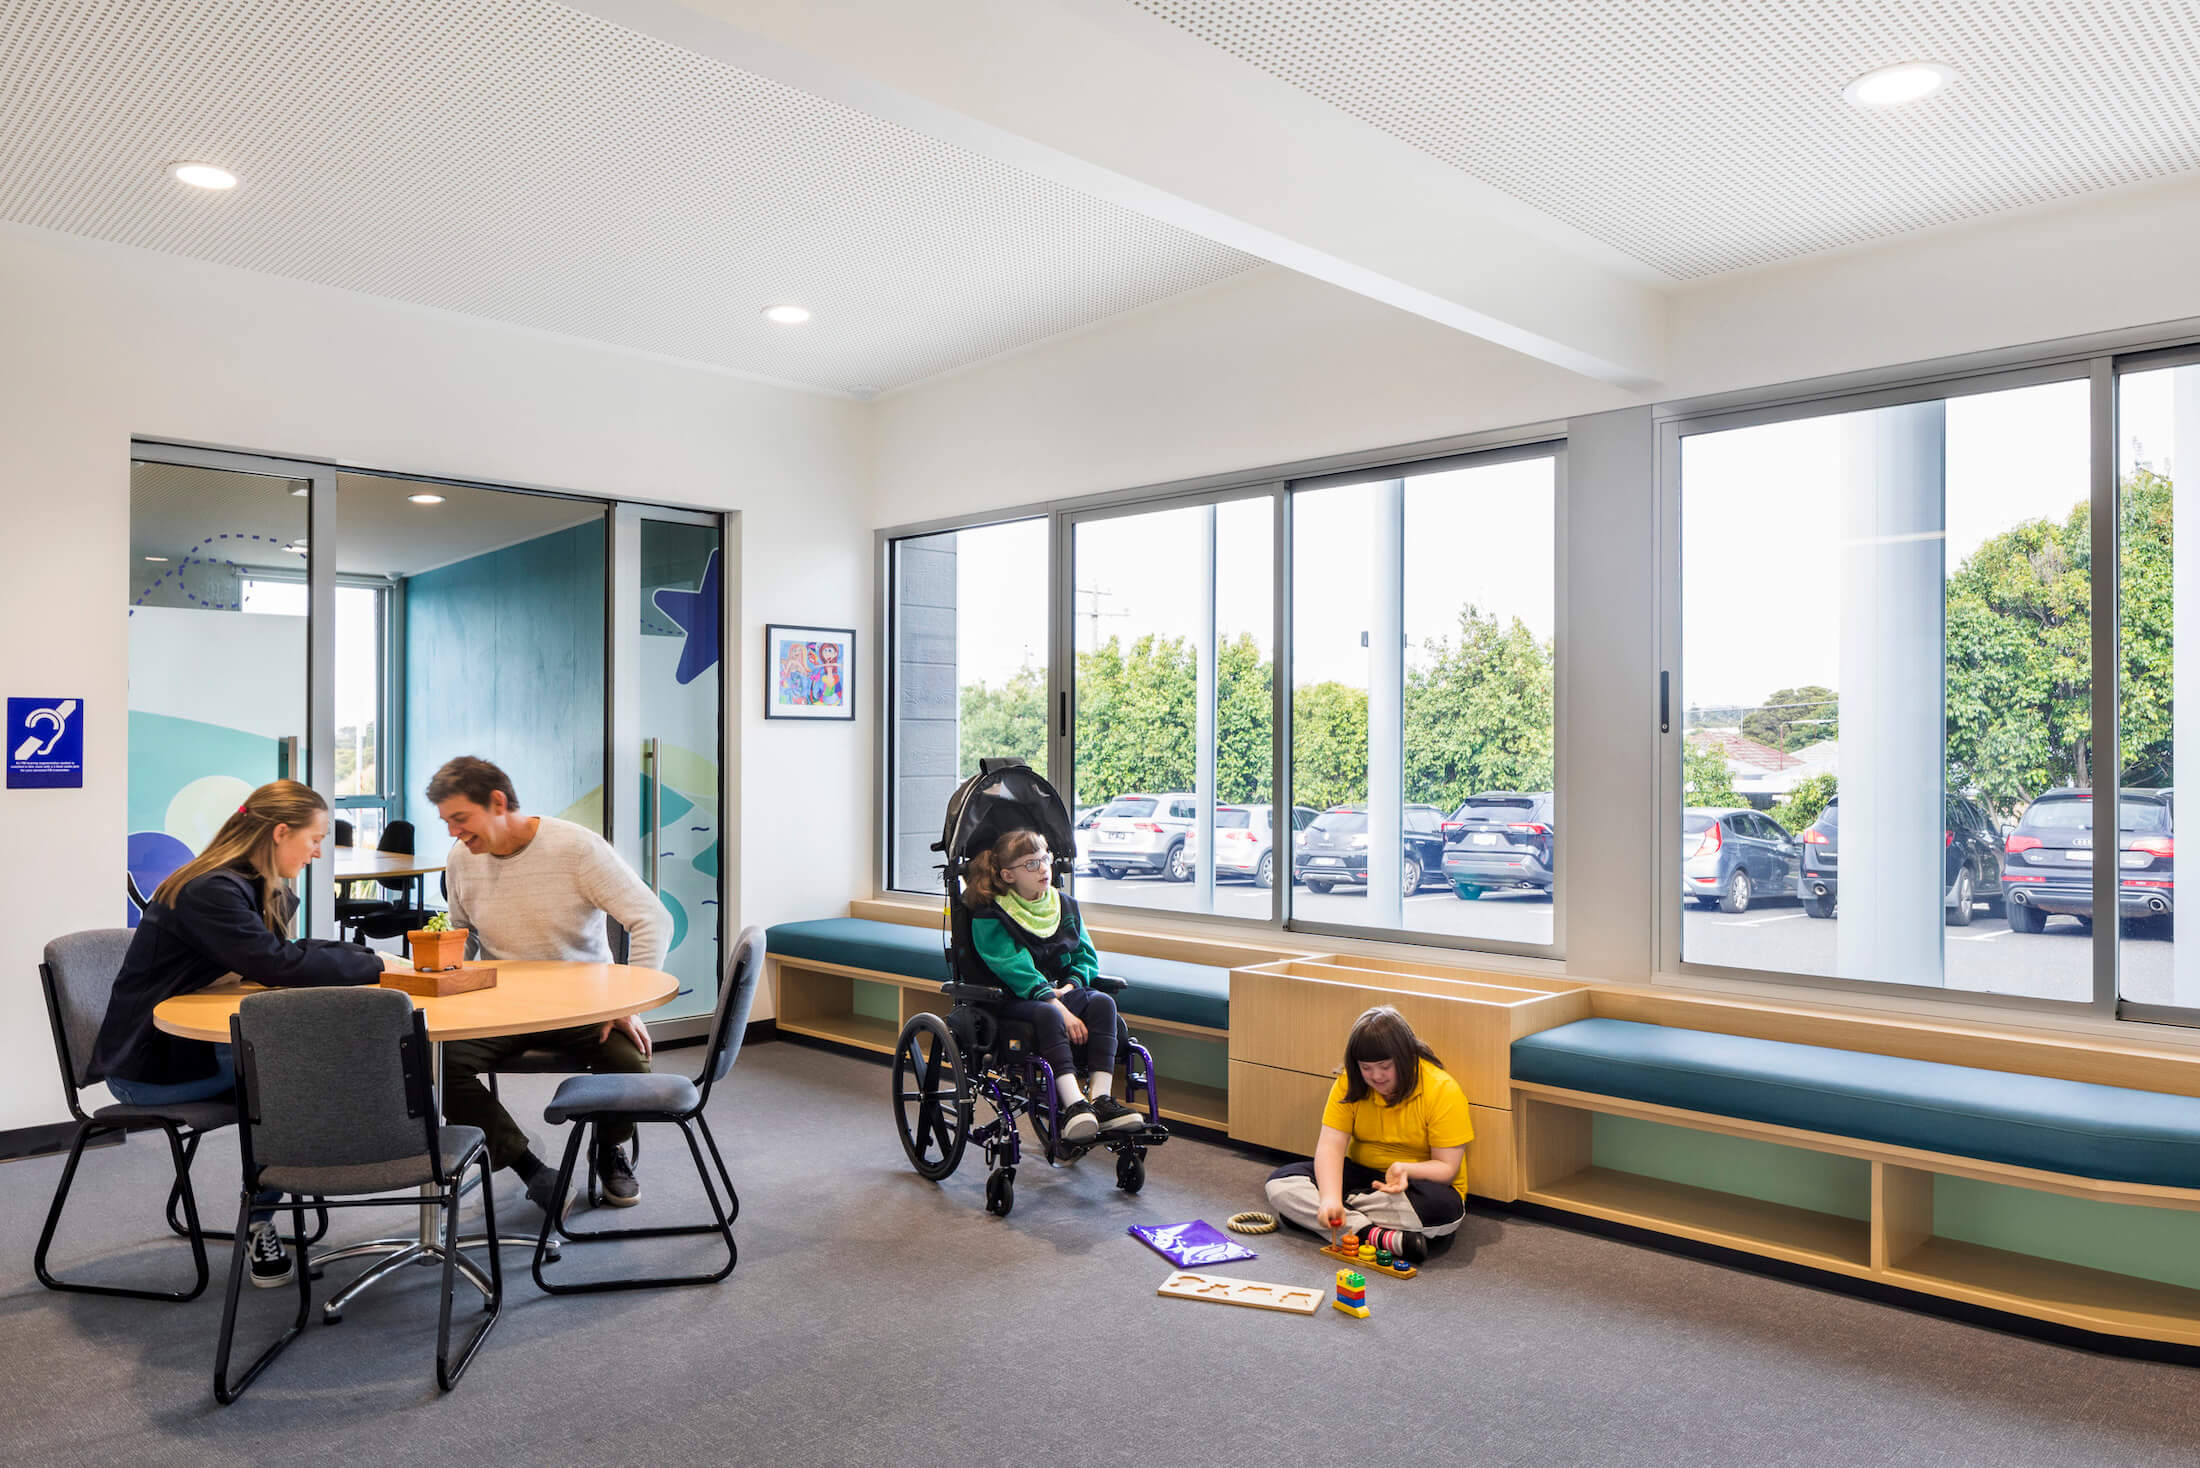 Adults at table in breakout area next to boardroom and reception, children sit in wheelchair and play with blocks on the floor